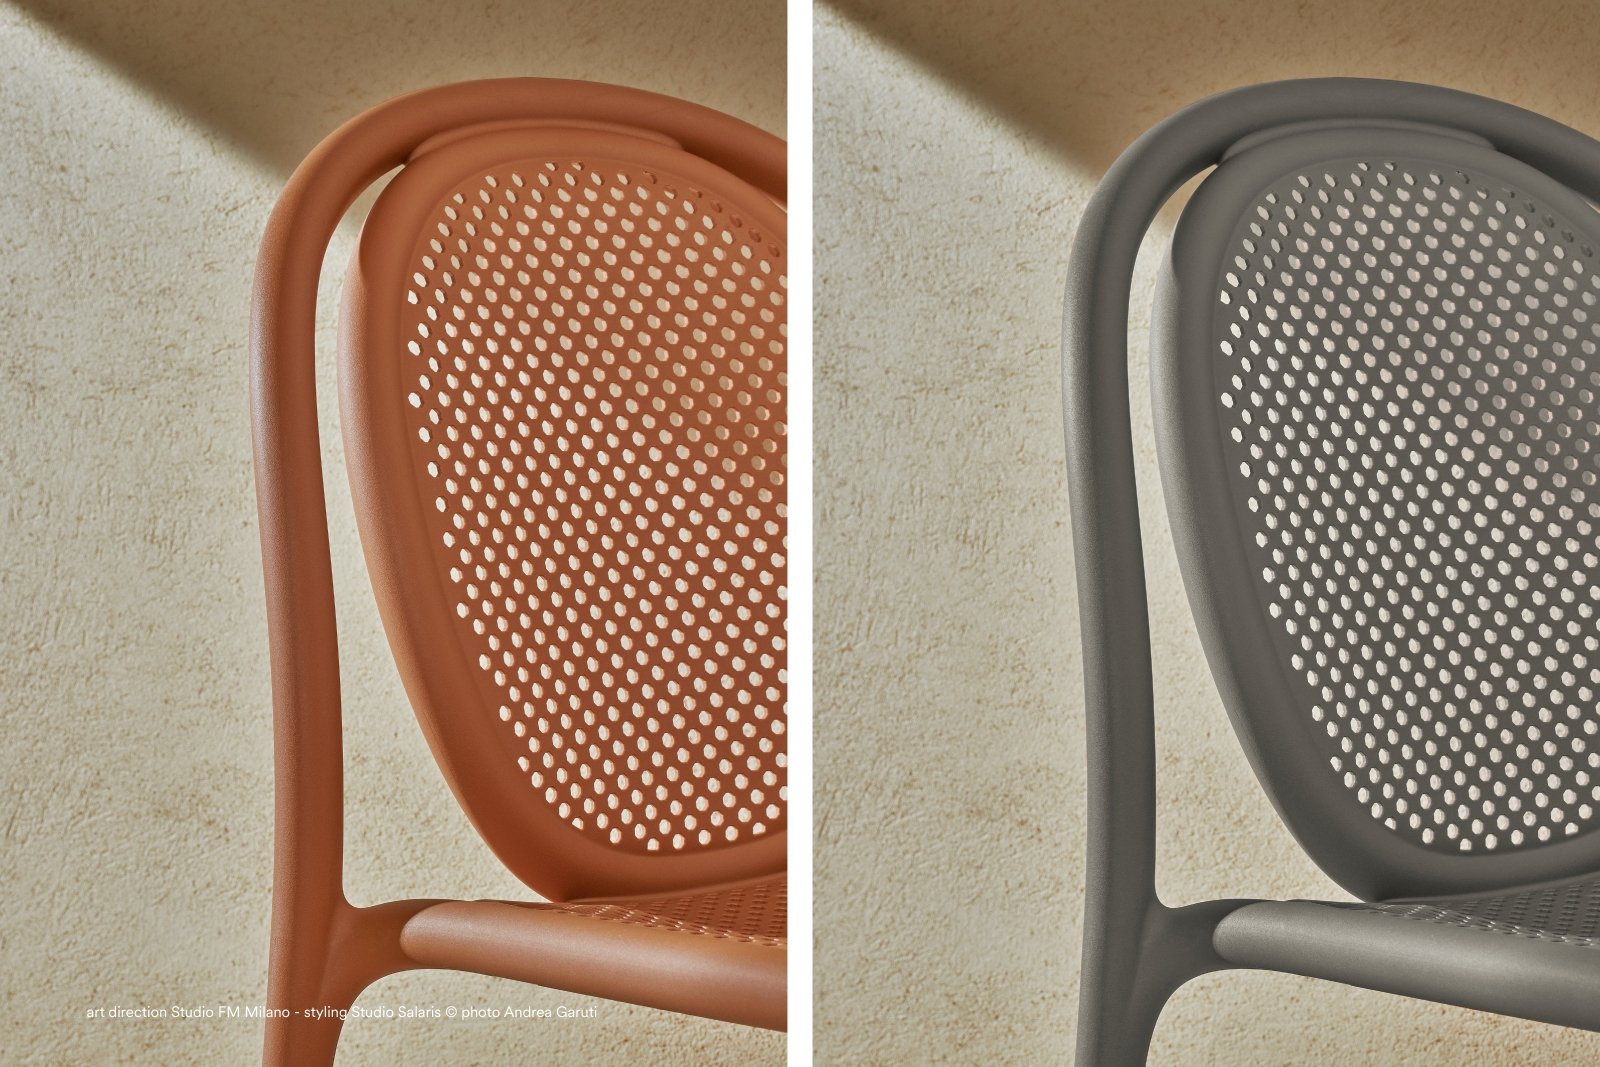 Remind 3730 Chair from Pedrali, designed by Eugeni Quitllet